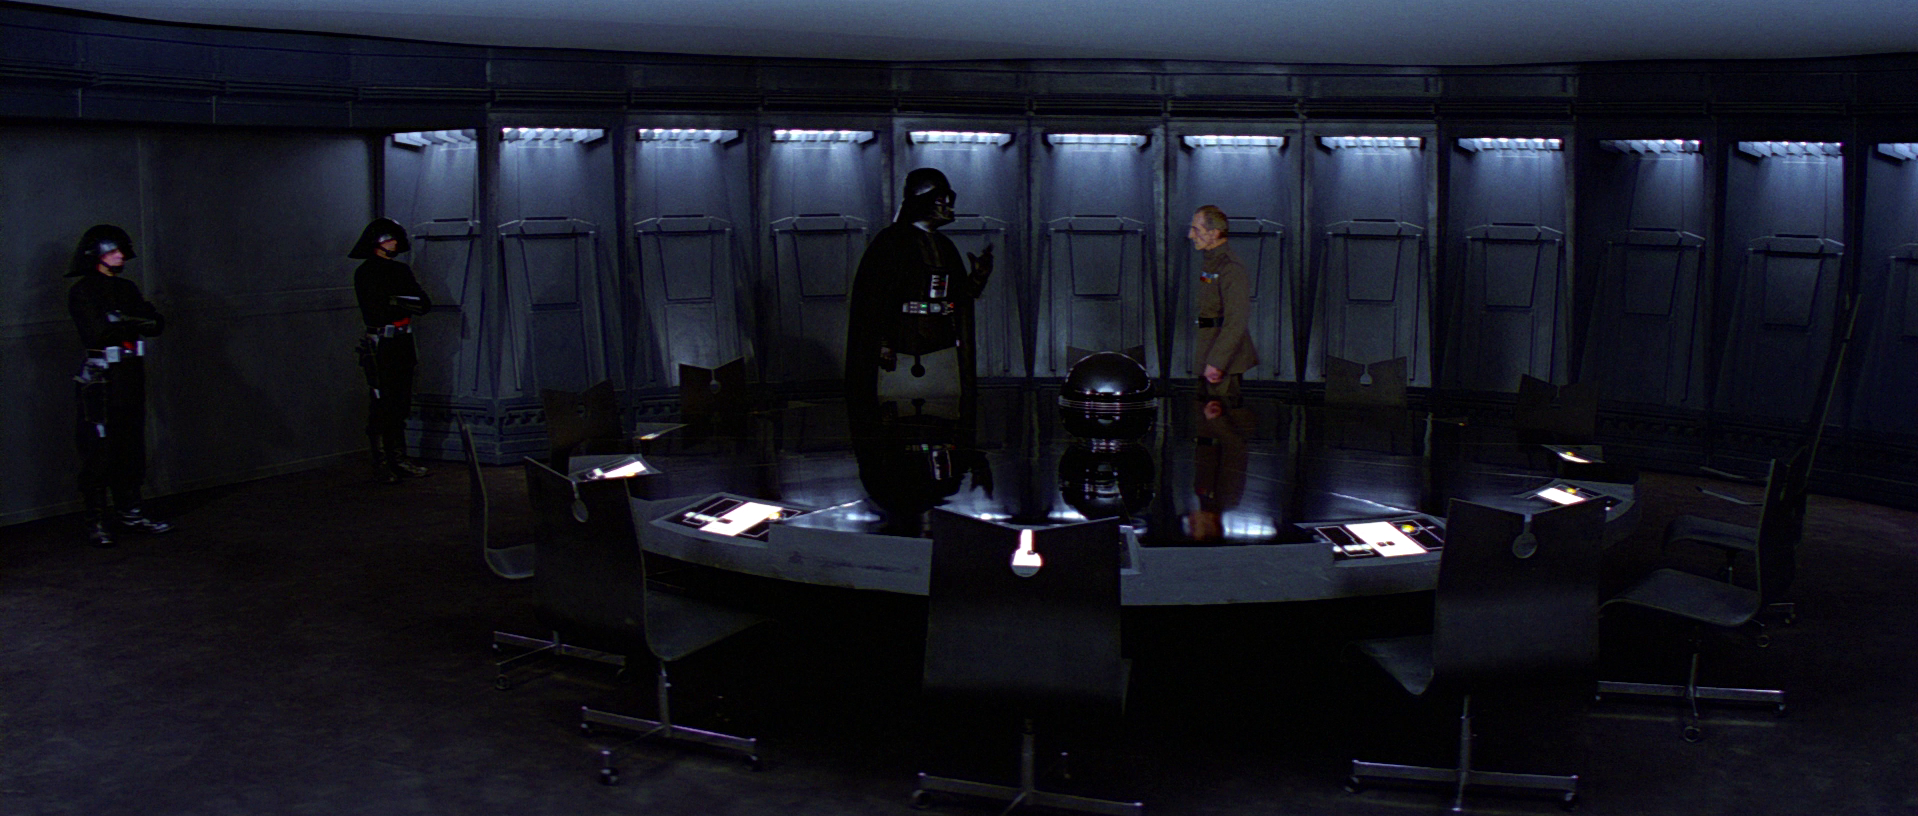 Death Star Conference Room Wookieepedia Fandom Powered By Wikia